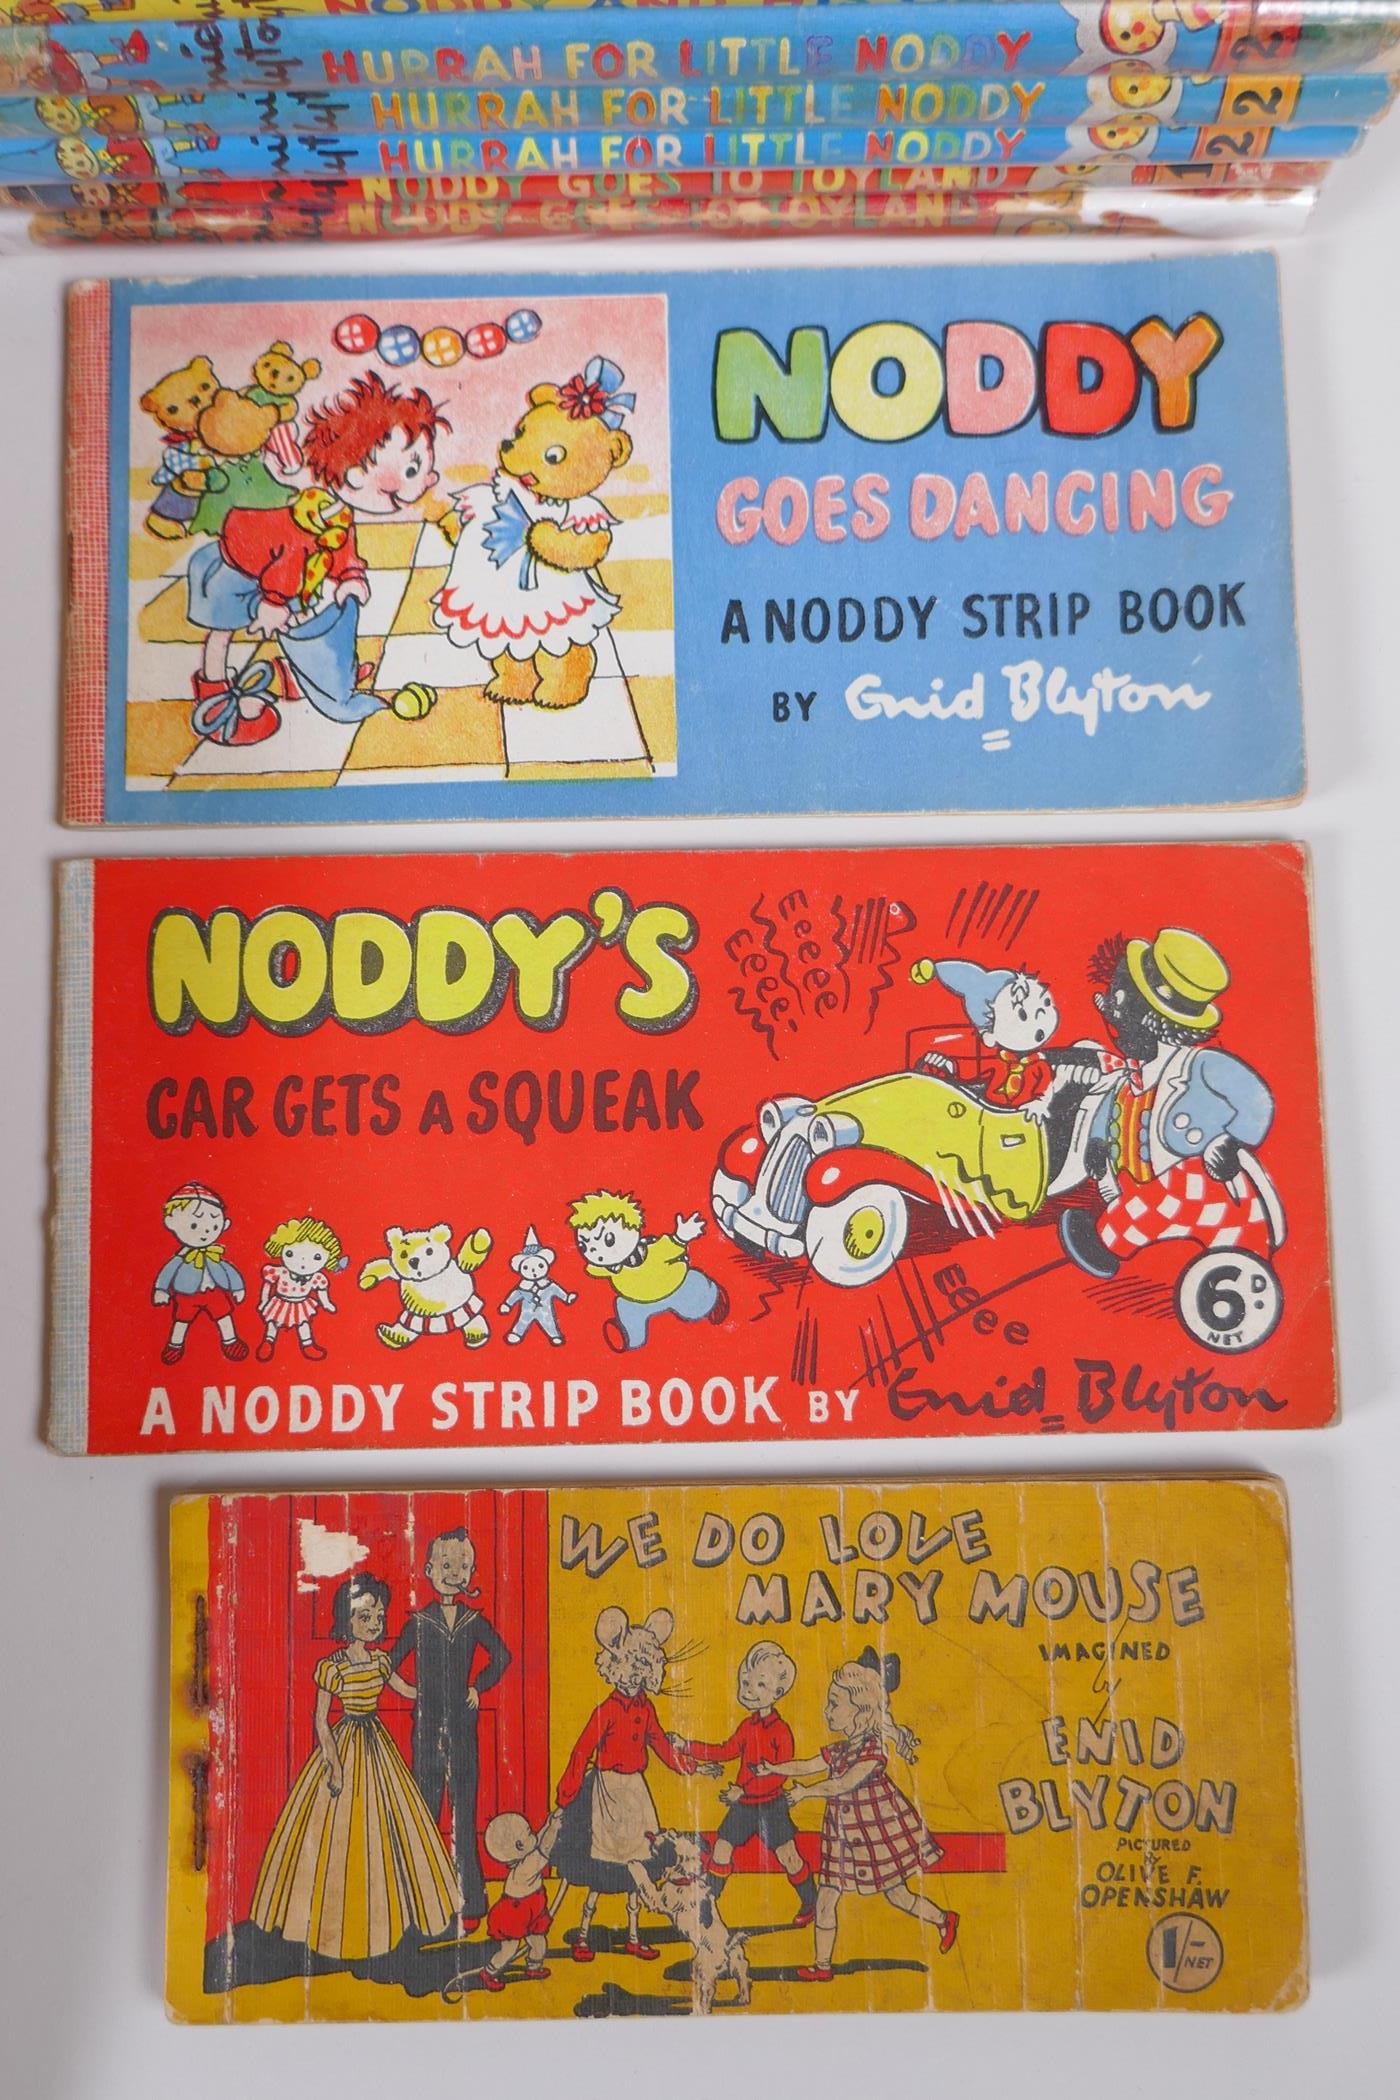 A collection of vintage children's books including various Noddy Volumes (1-14, many duplicates), - Image 3 of 6